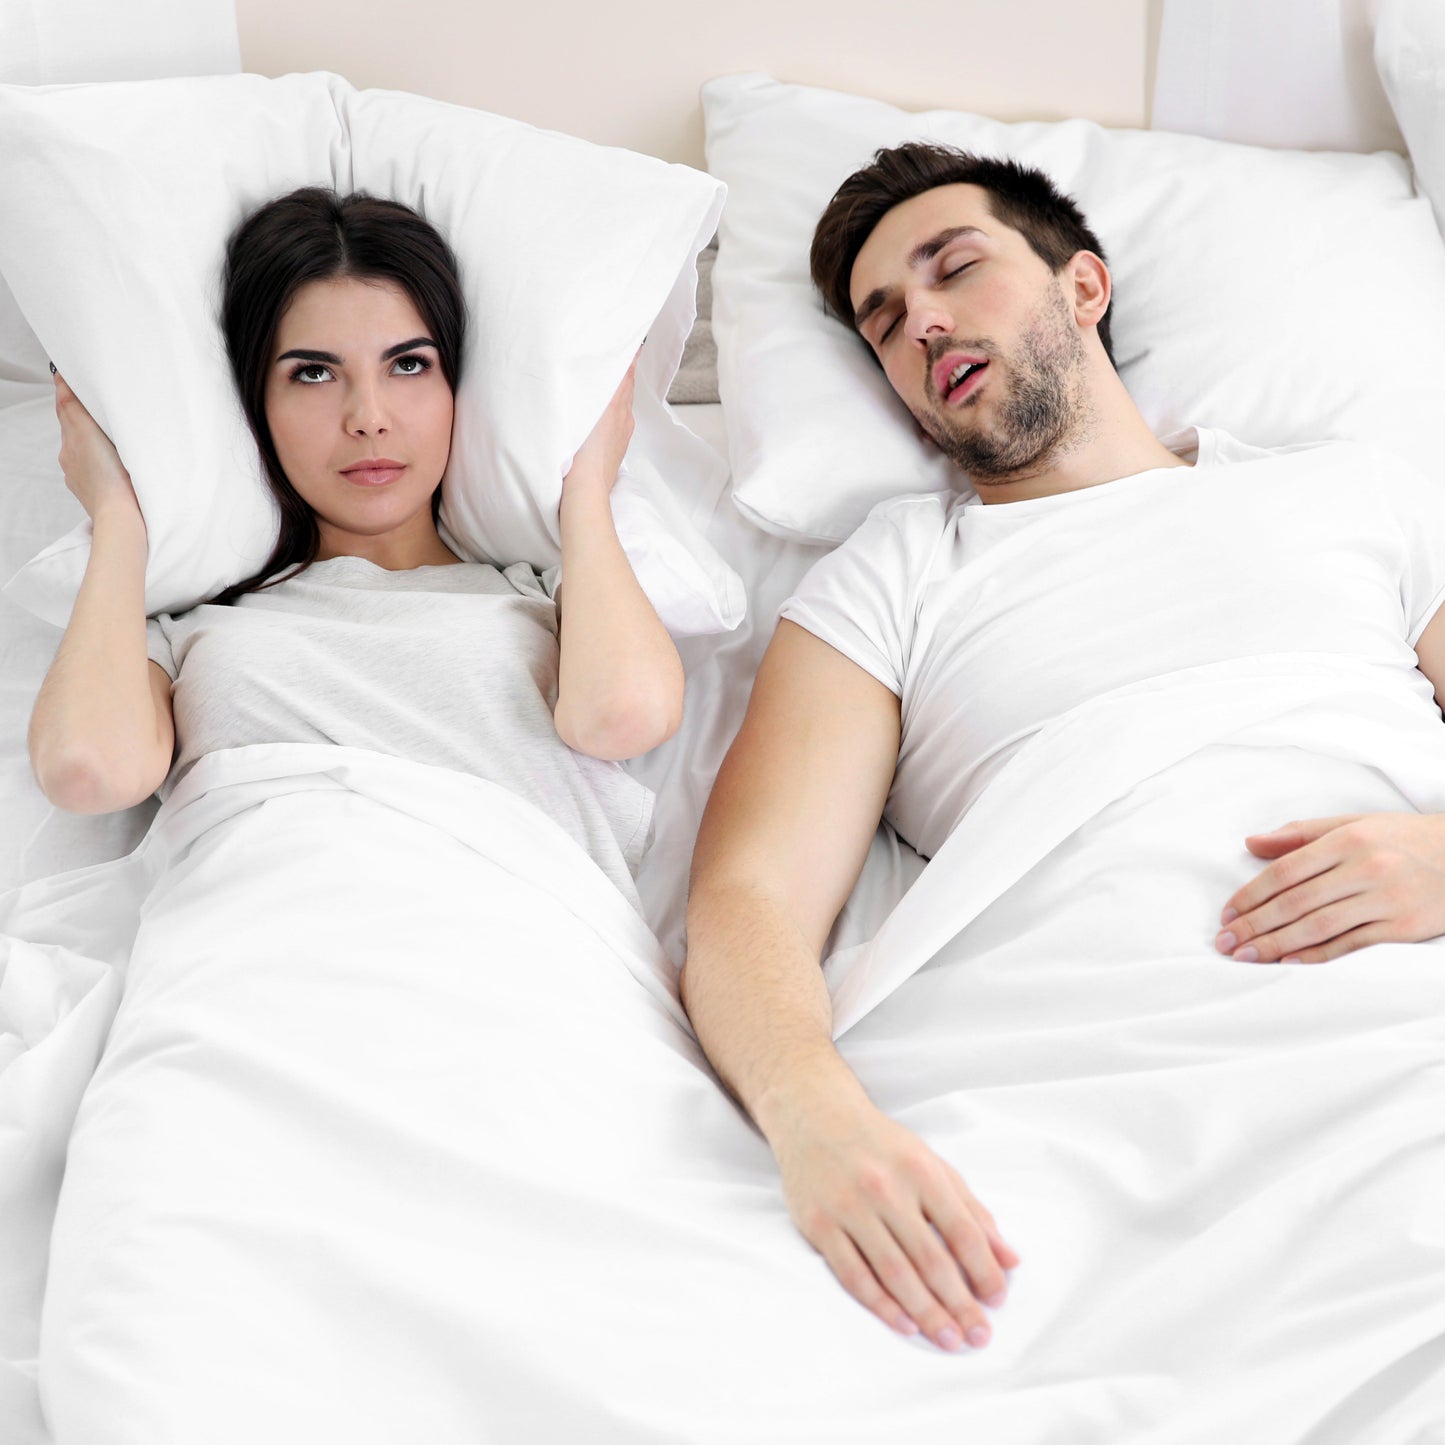 Snore No More: How Adjustable Beds Can Help Improve Your Sleep